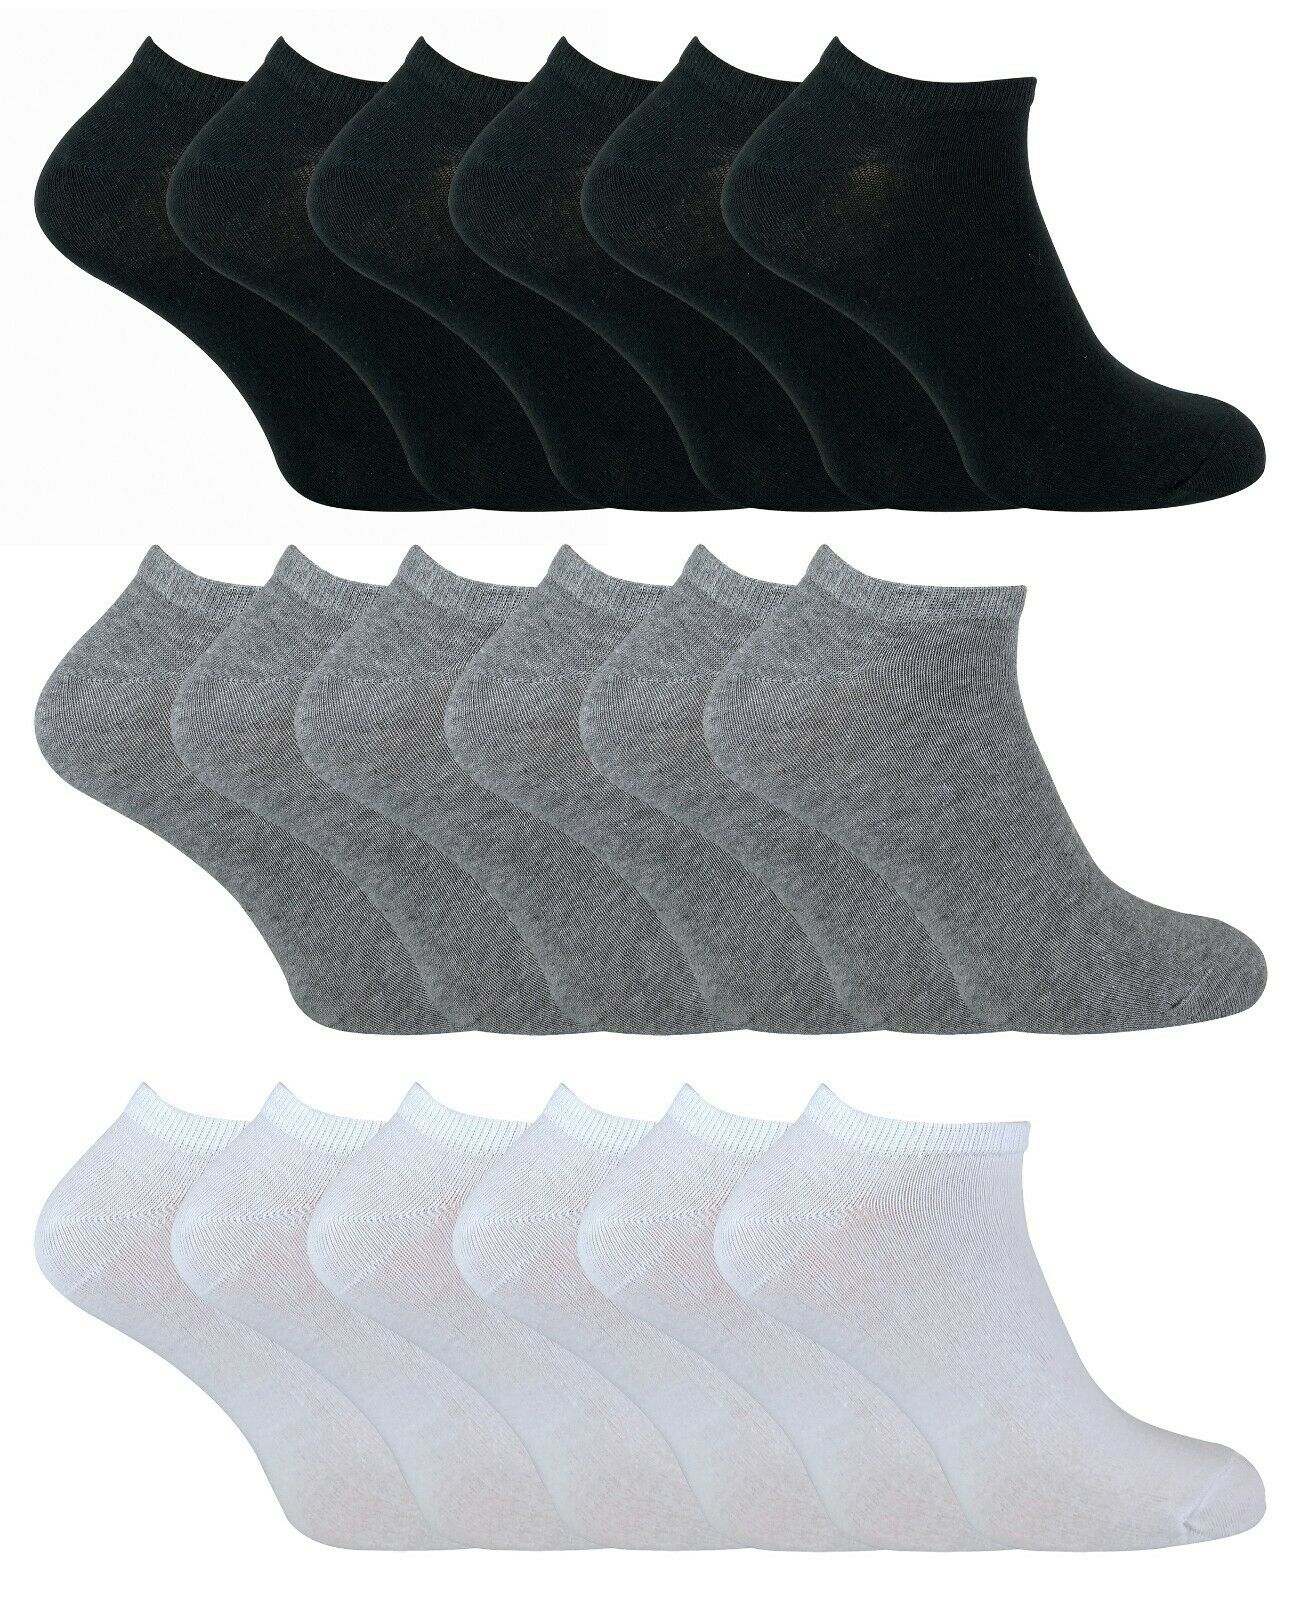 Low Cut Ankle Socks Trainer Socks, 3 pack, assorted colors,